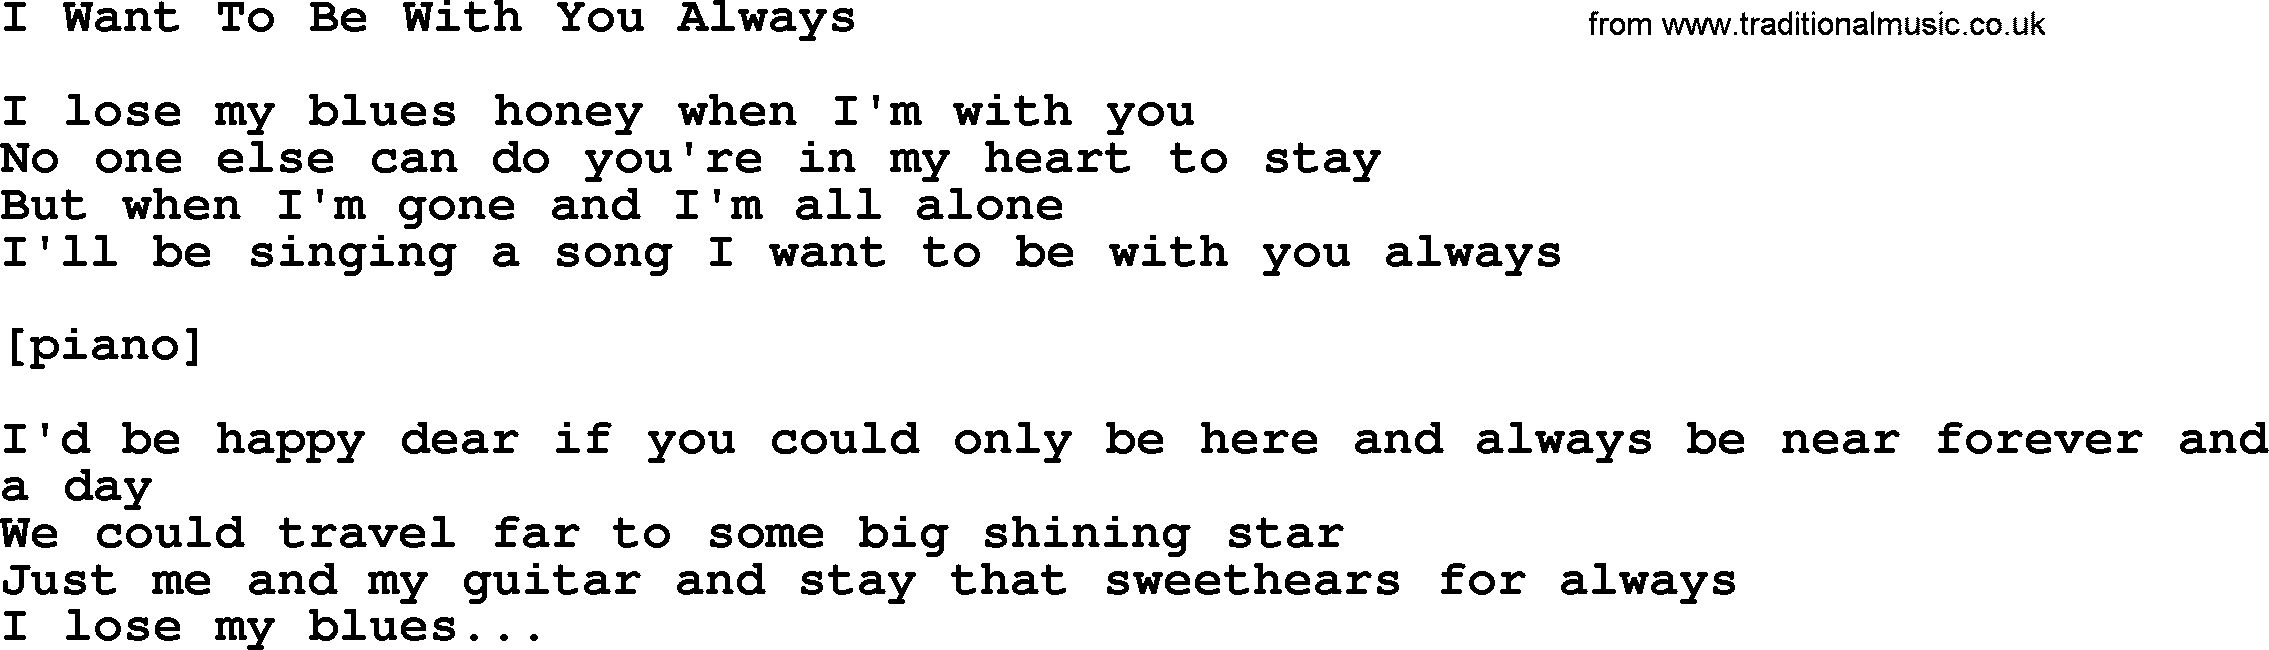 Willie Nelson song: I Want To Be With You Always lyrics